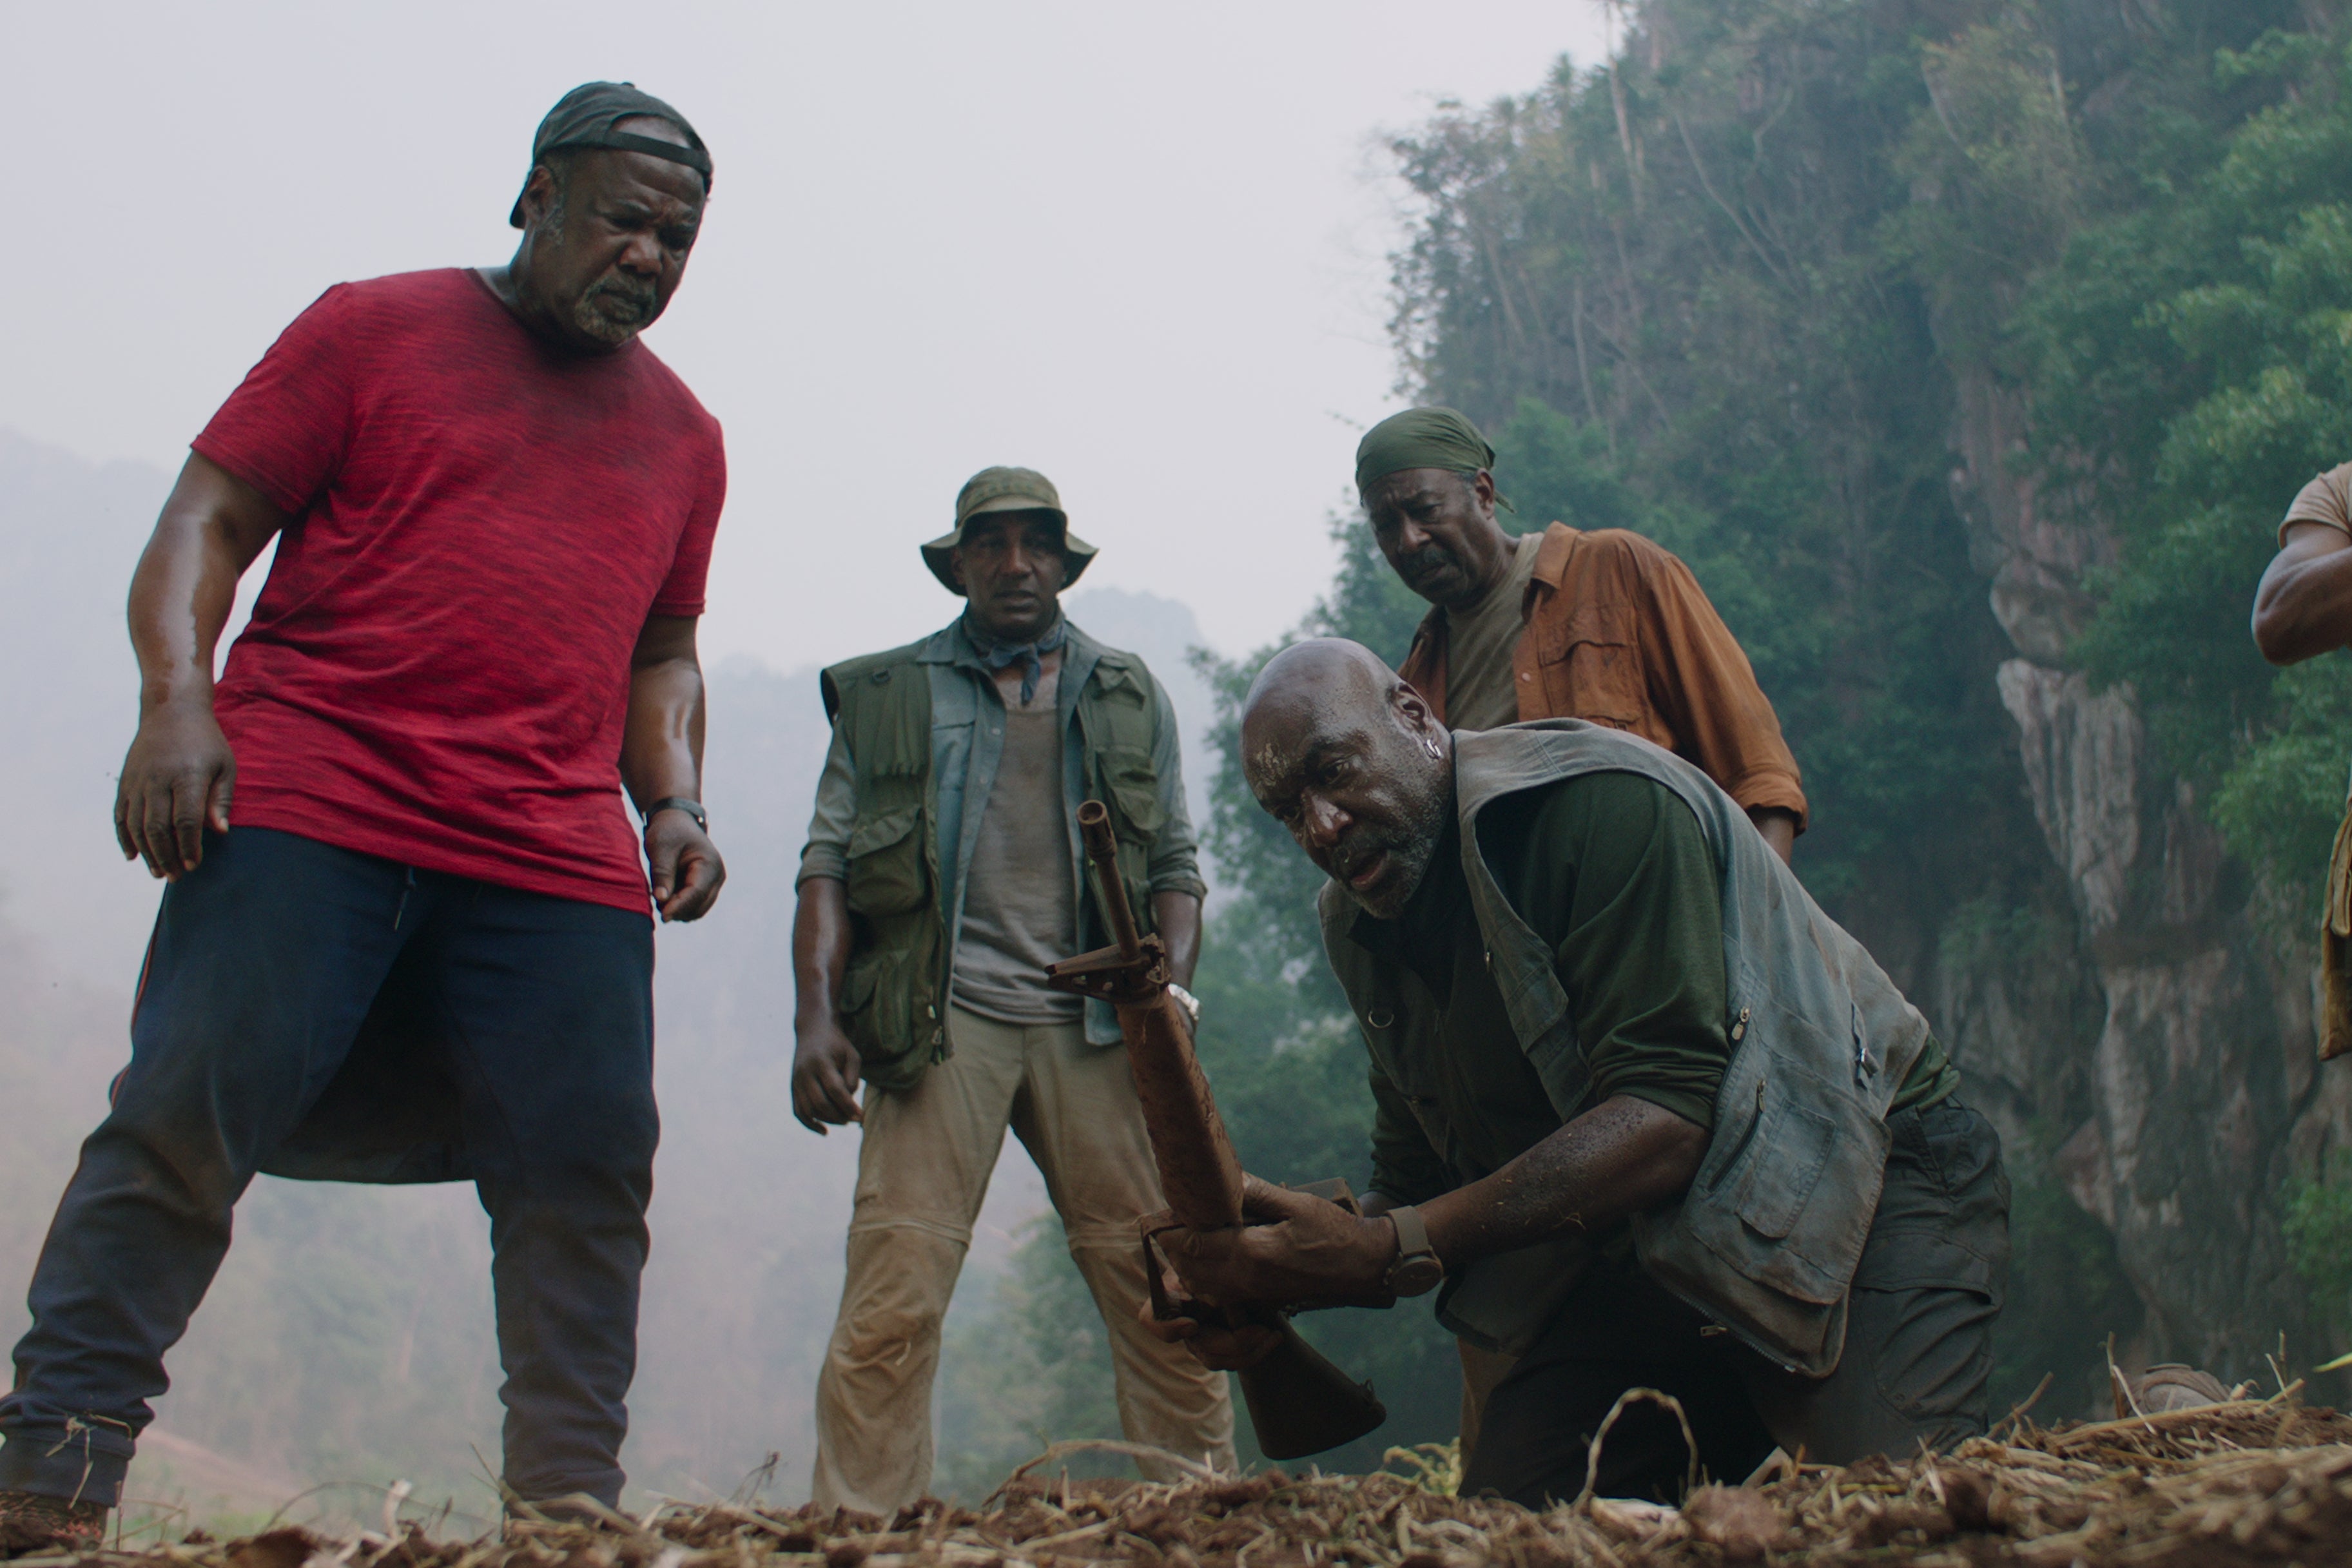 Men gather around Delroy Lindo as he lifts a rifle from the ground